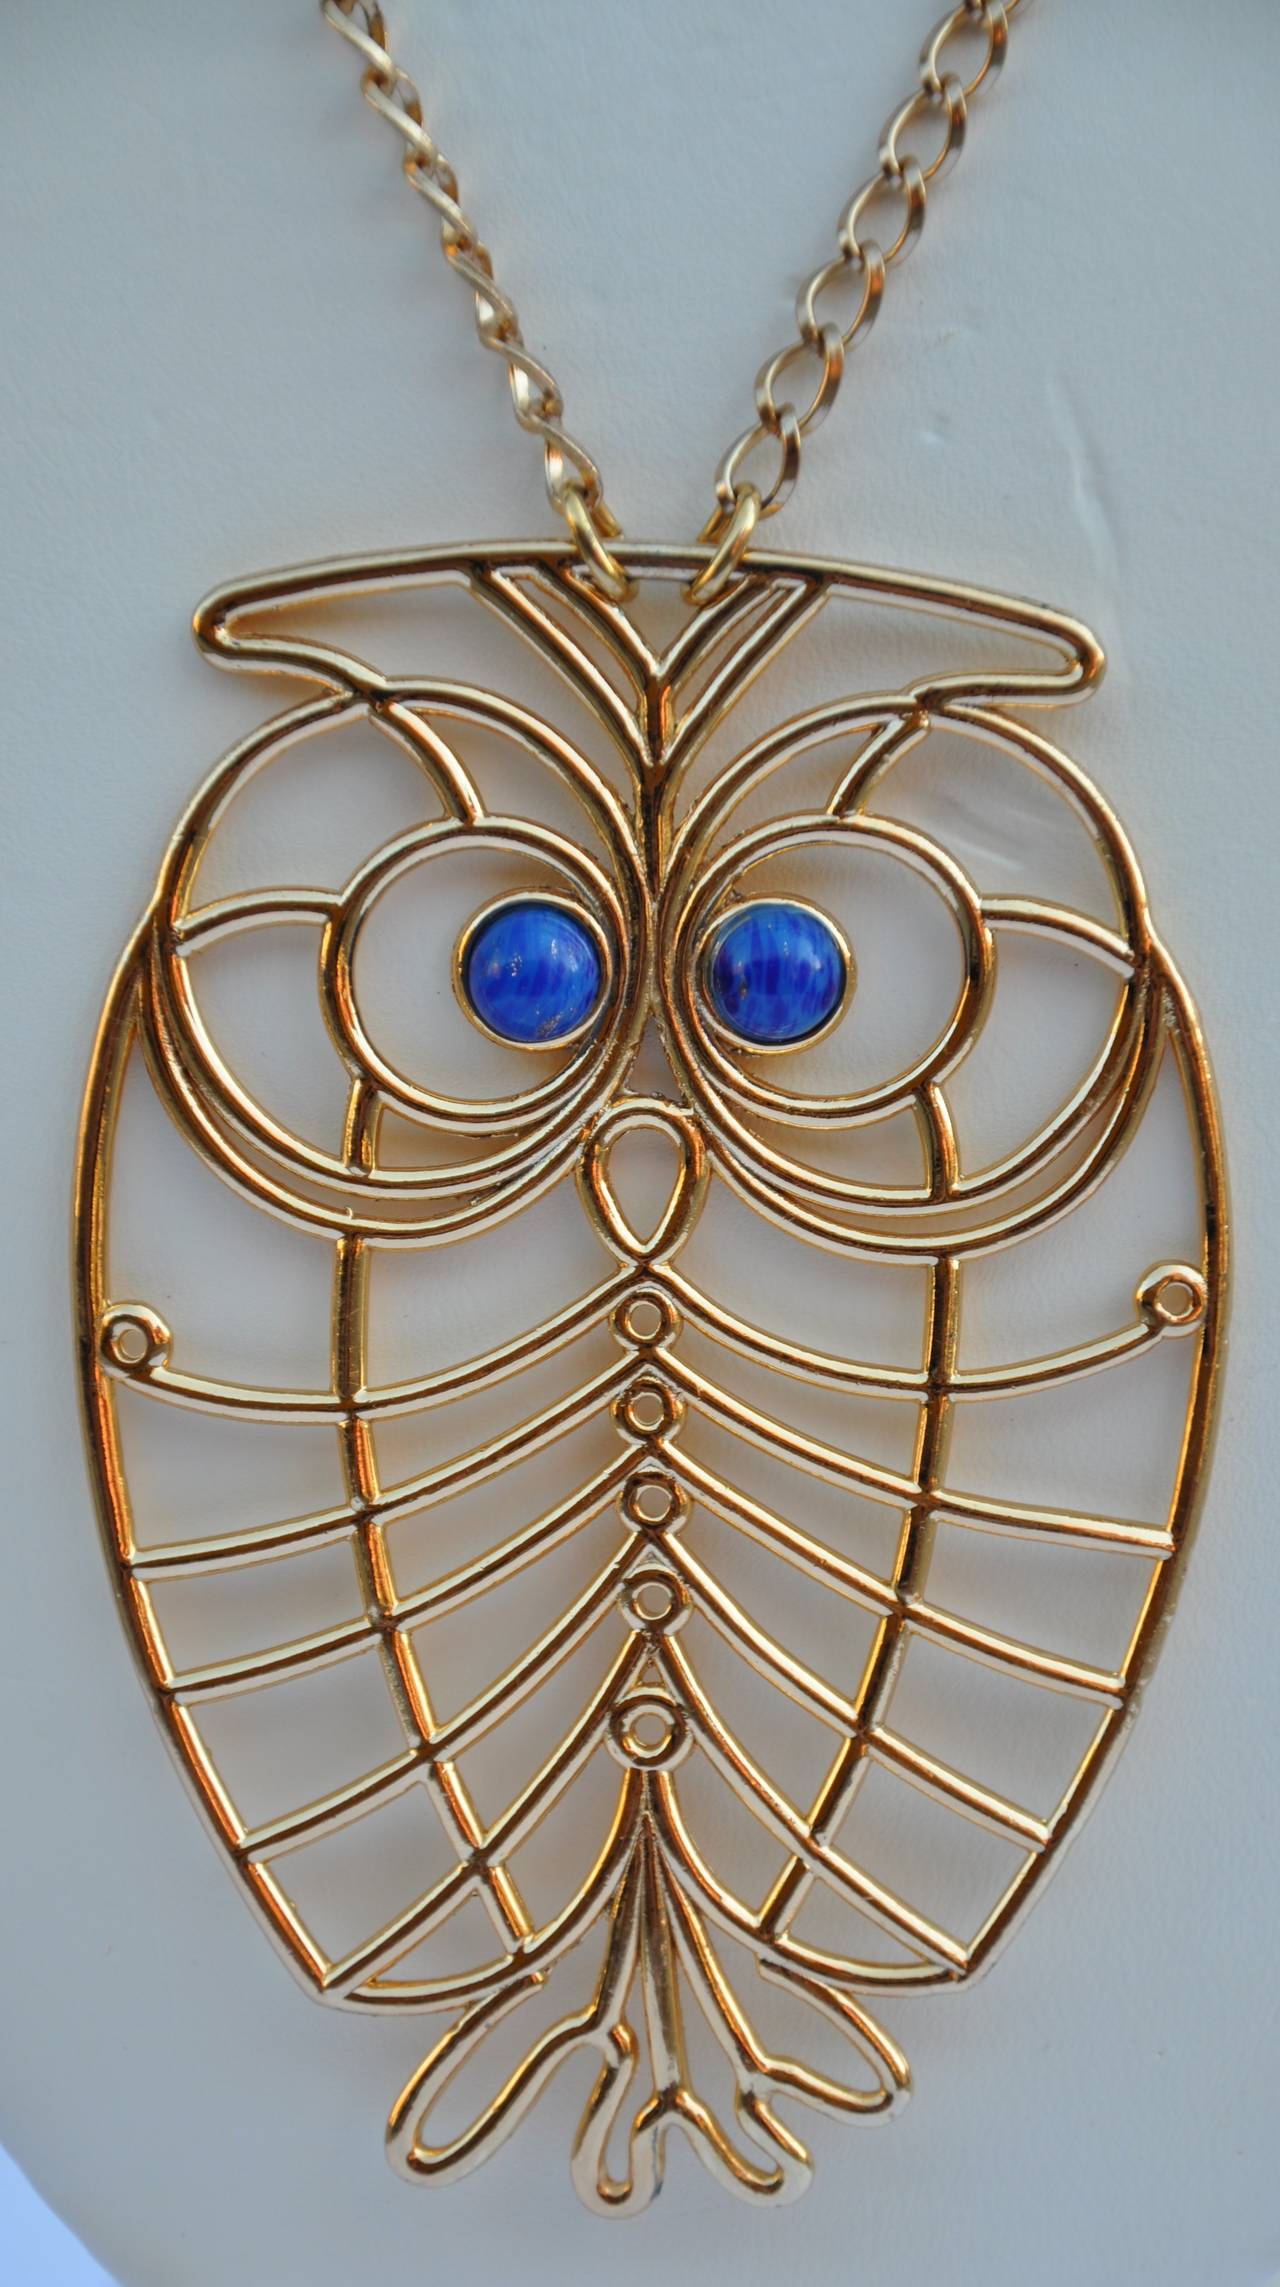        This wonderfully whimsical Napier "Owl" pendant and necklace is finished in gild gold hardware. The pendant is signed along the backside. The necklace measures 30 1/2" in total length. The pendant measures 3 1/2" in